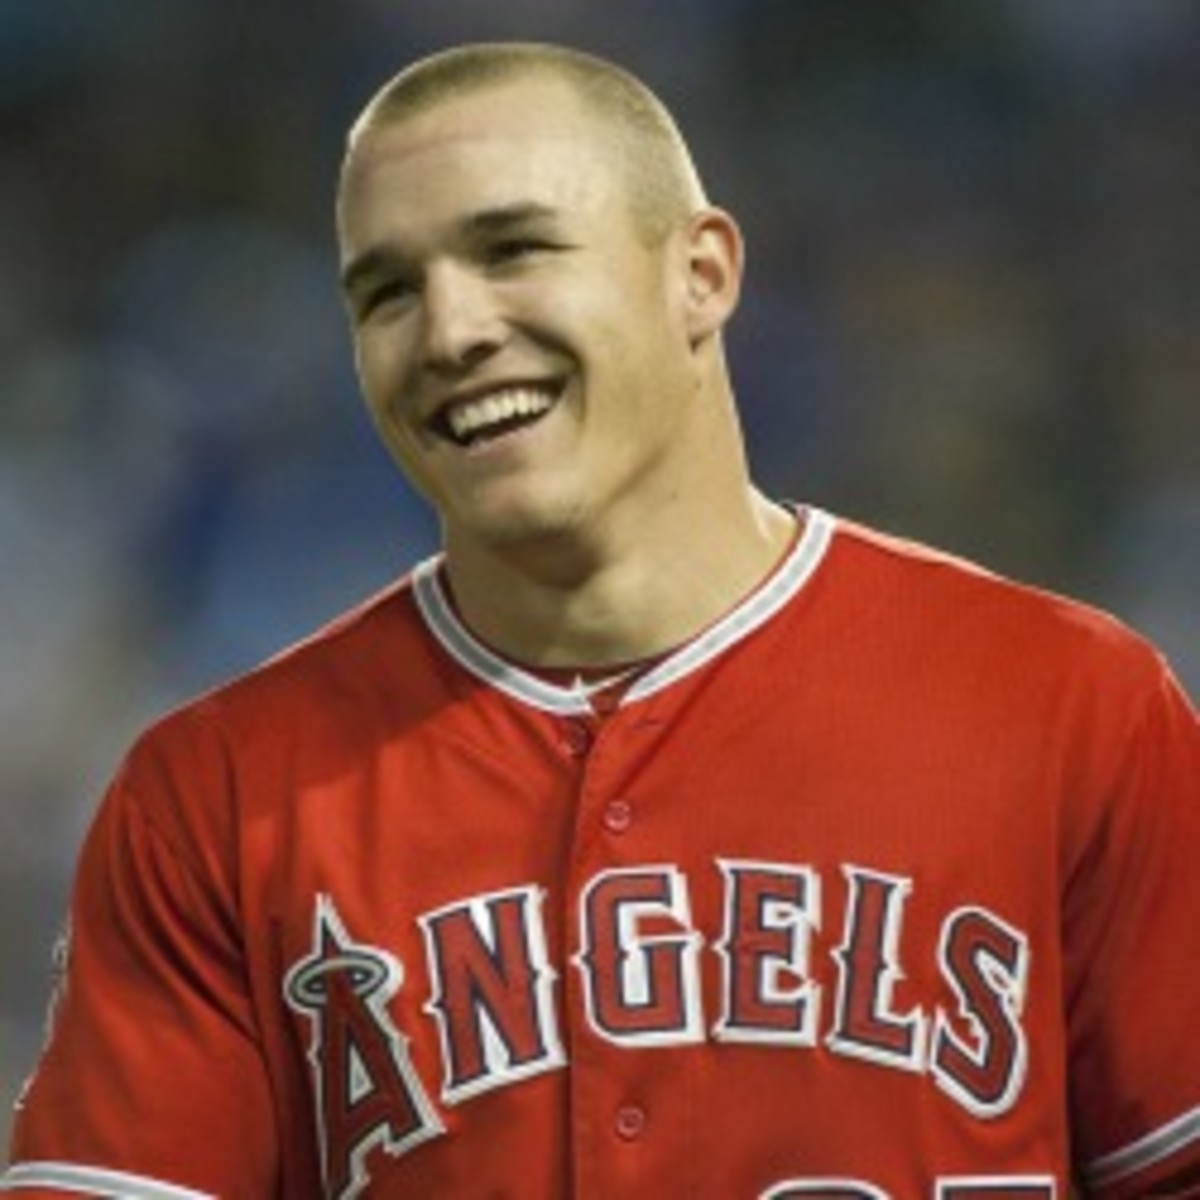 Angels outfielder Mike Trout reportedly told the WBC committee he did not want to participate before they asked him. (Tim Umphrey/Getty ImageS)